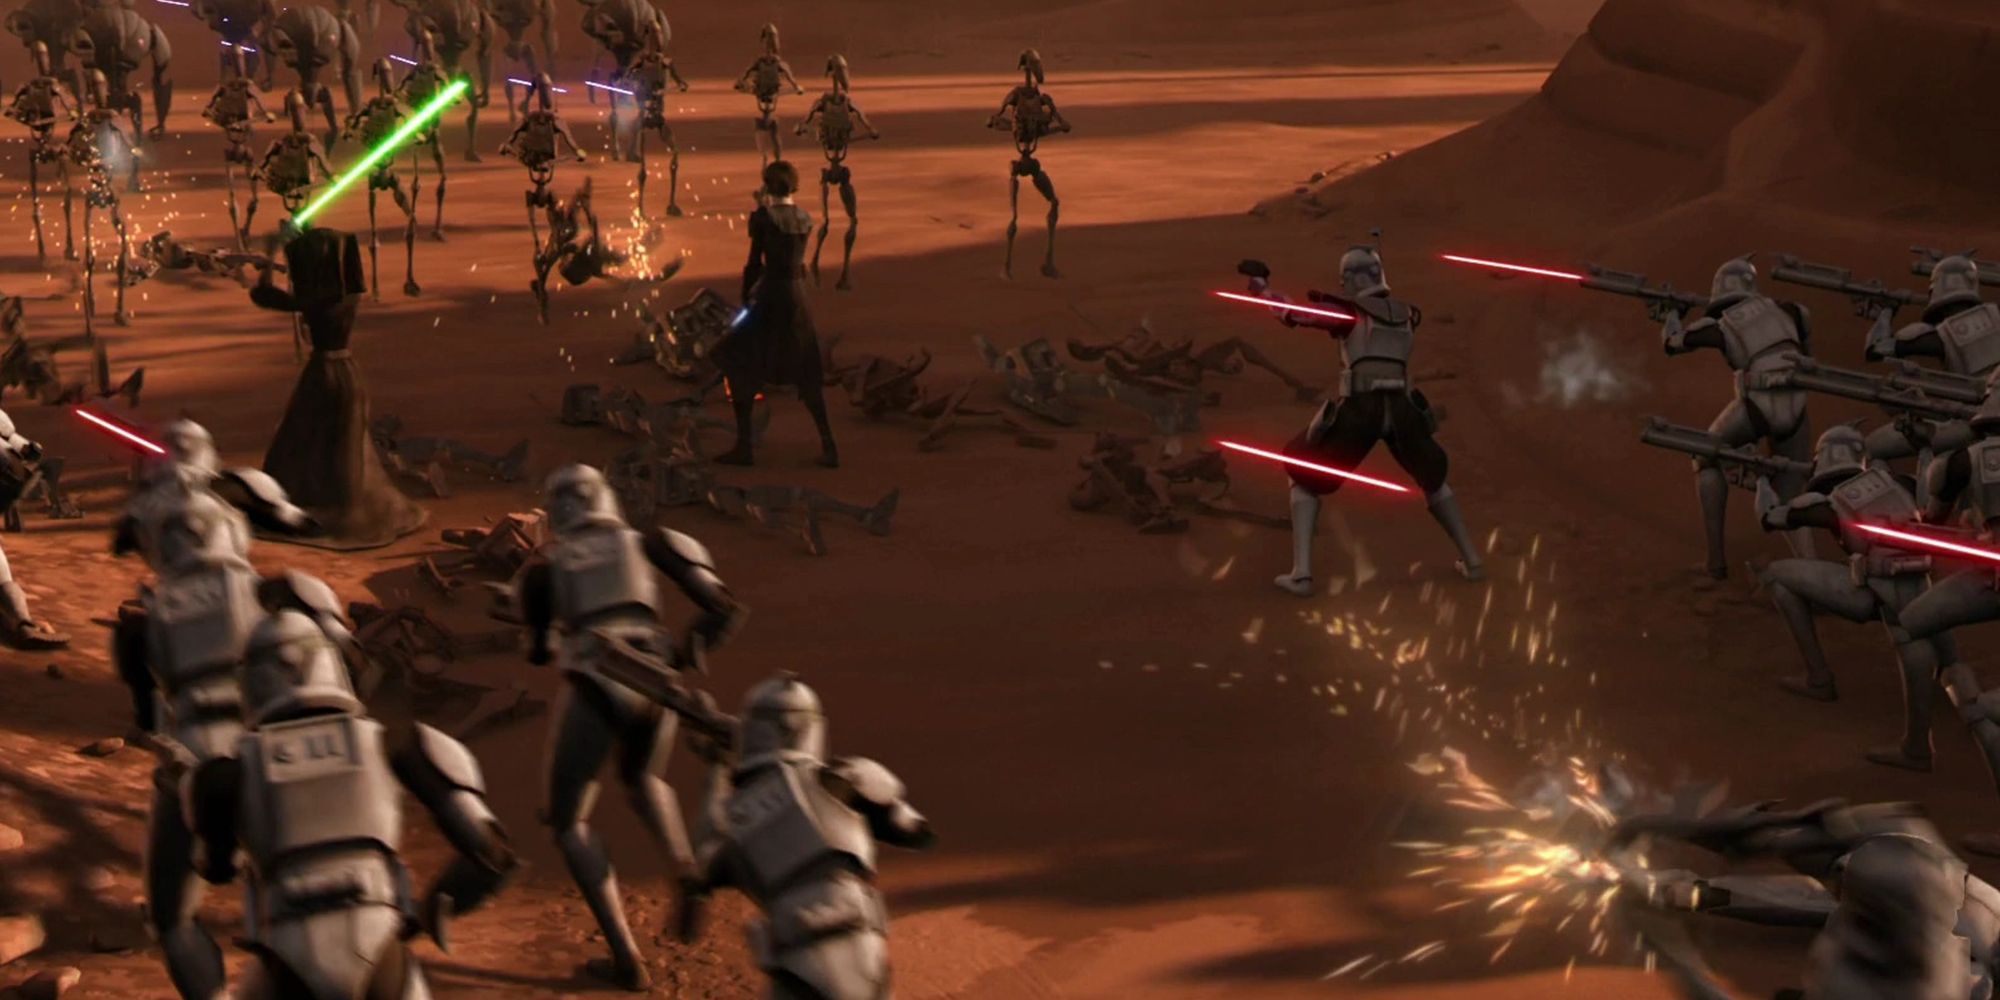 The Second Battle Of Geonosis In Star Wars: The Clone Wars